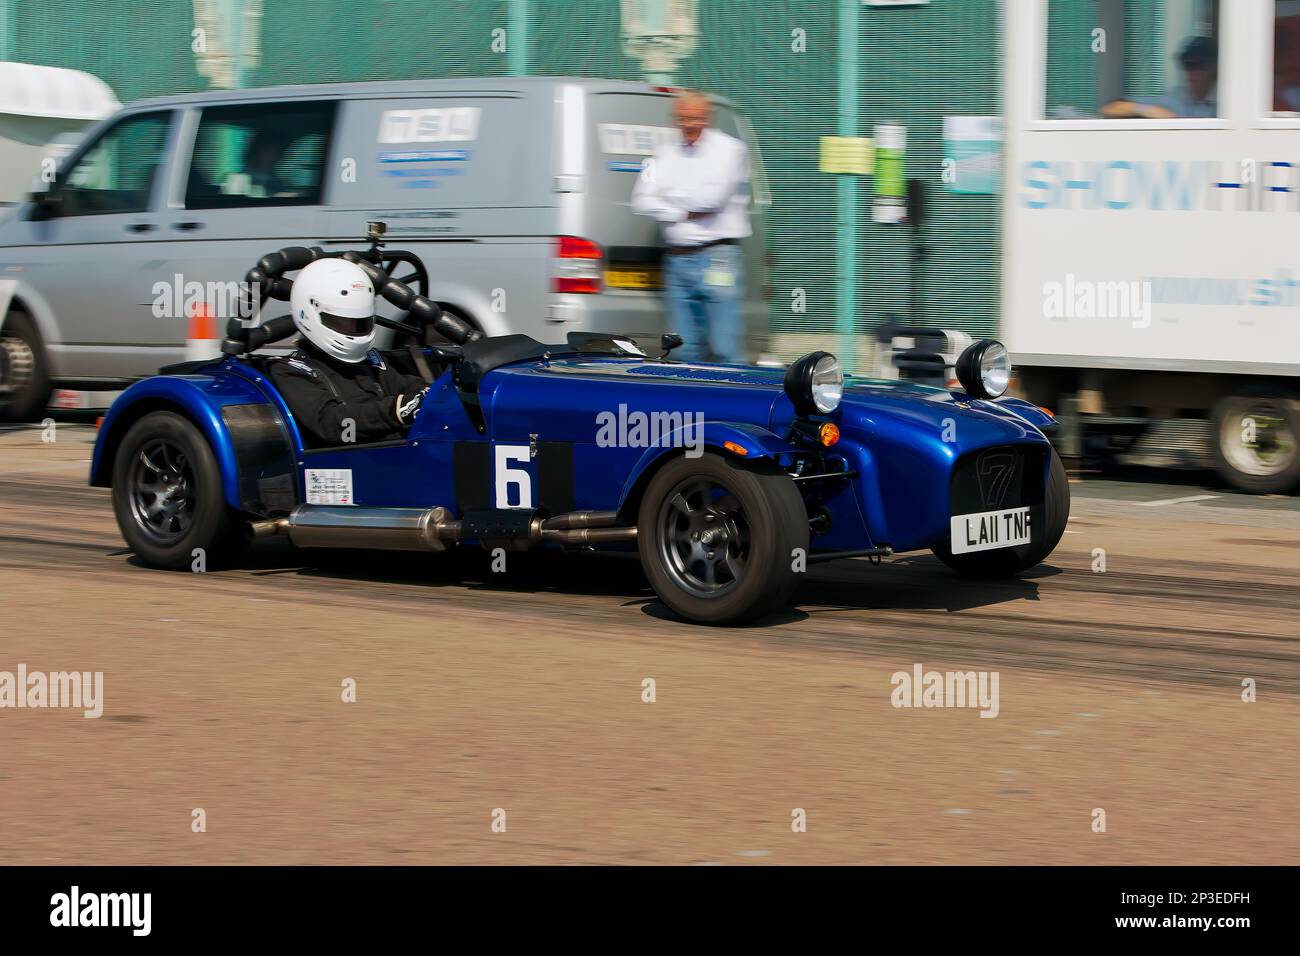 Tony Smith driving a Caterham 7 at The Brighton National Speed Trials 2017. This is the oldest motor racing event in the UK and is held in the south east coastal town of Brighton. Madeira drive is a road which runs along the seafront and is normal full of people explorer the beach, pier and local attractions. Today it is turned in to a 1/4 time trial course. 2nd September 2017. Stock Photo